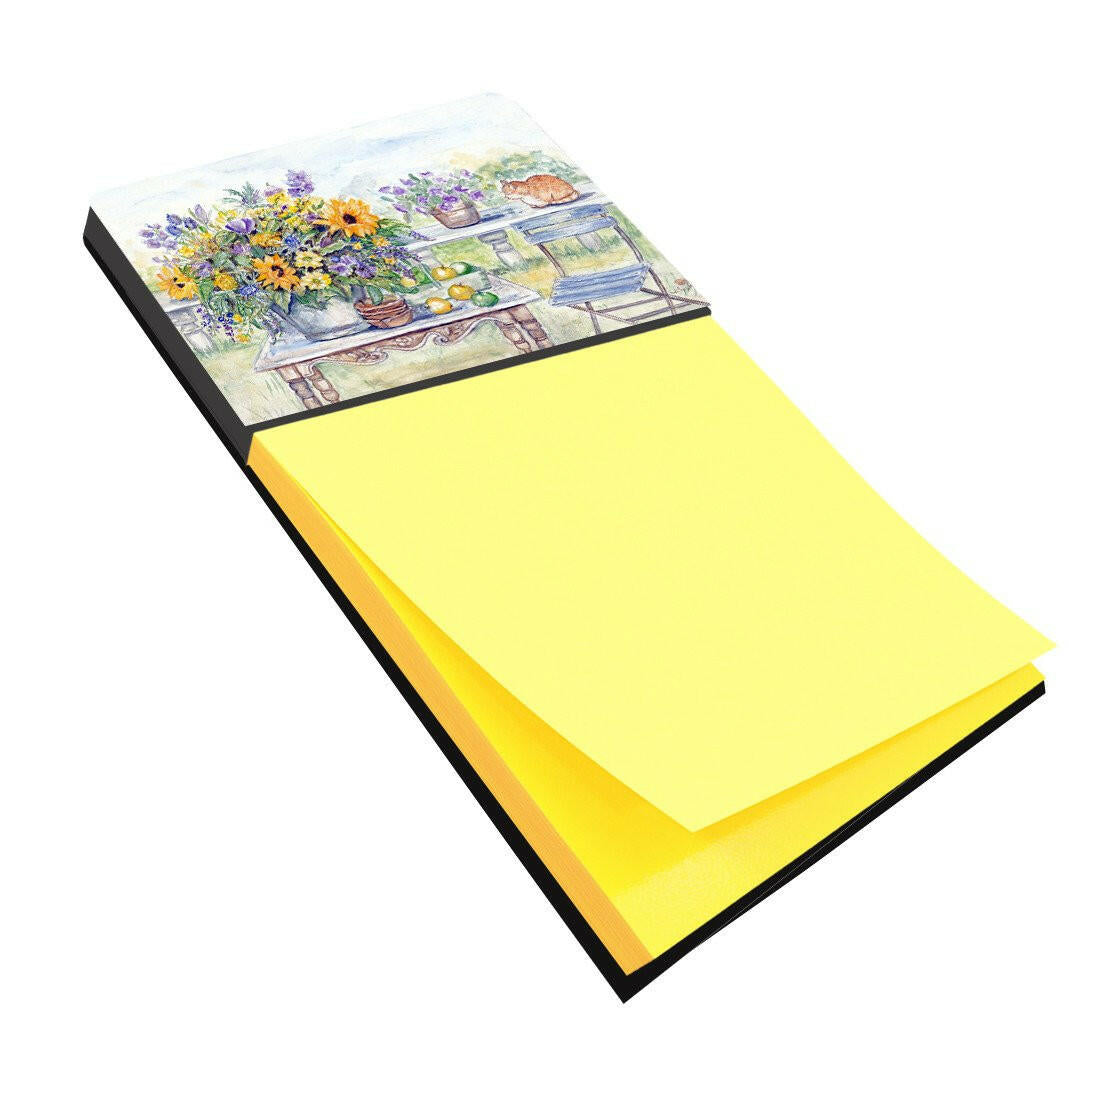 Patio Bouquet of Flowers Sticky Note Holder APH3566SN by Caroline's Treasures